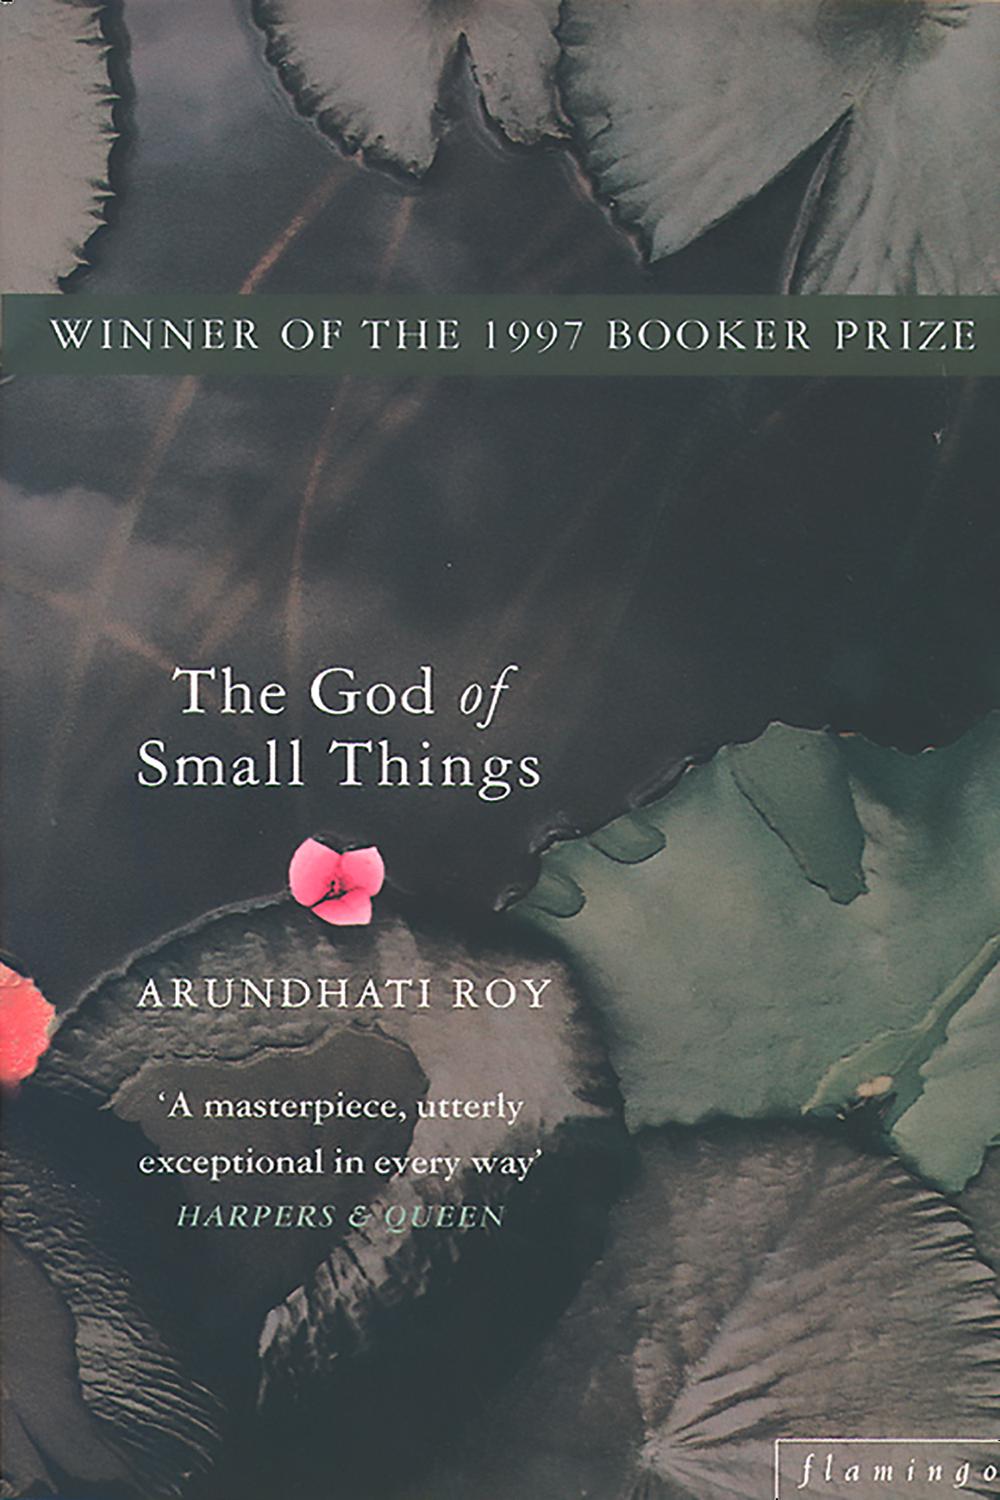 The God of Small Things - Arundhati Roy,,